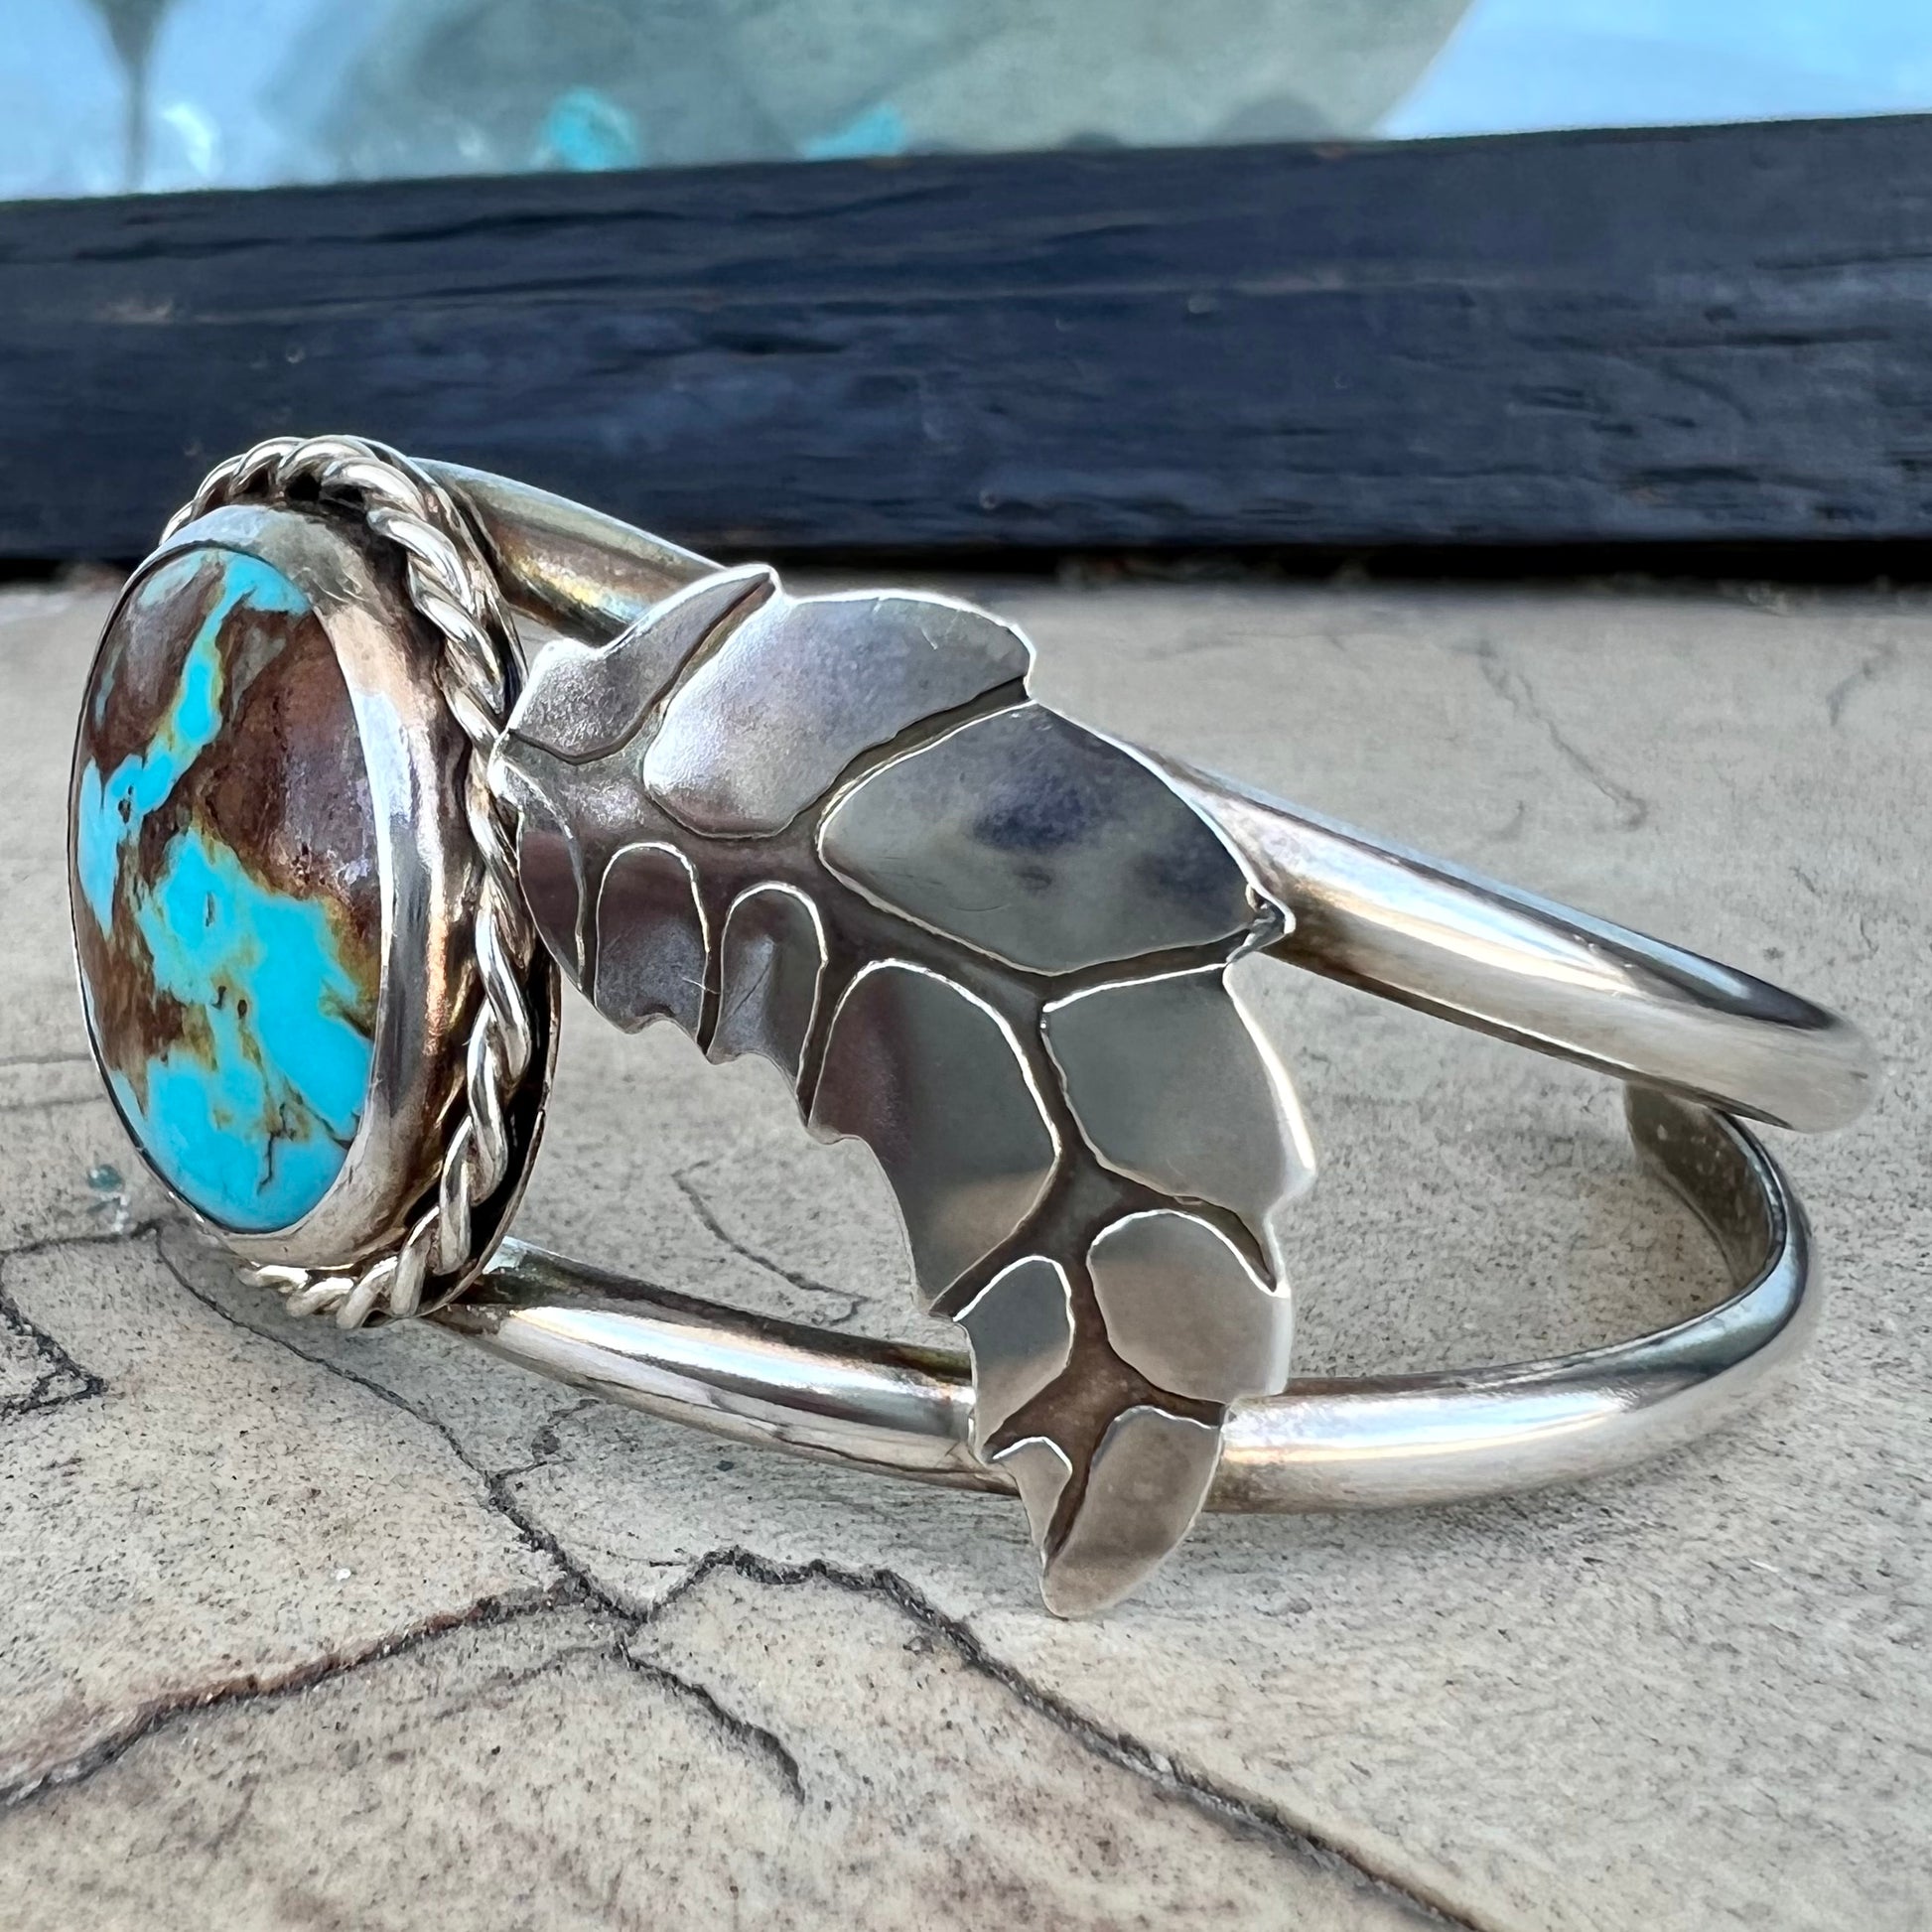 A sterling silver Navajo cuff bracelet set with a Royston turquoise stone.